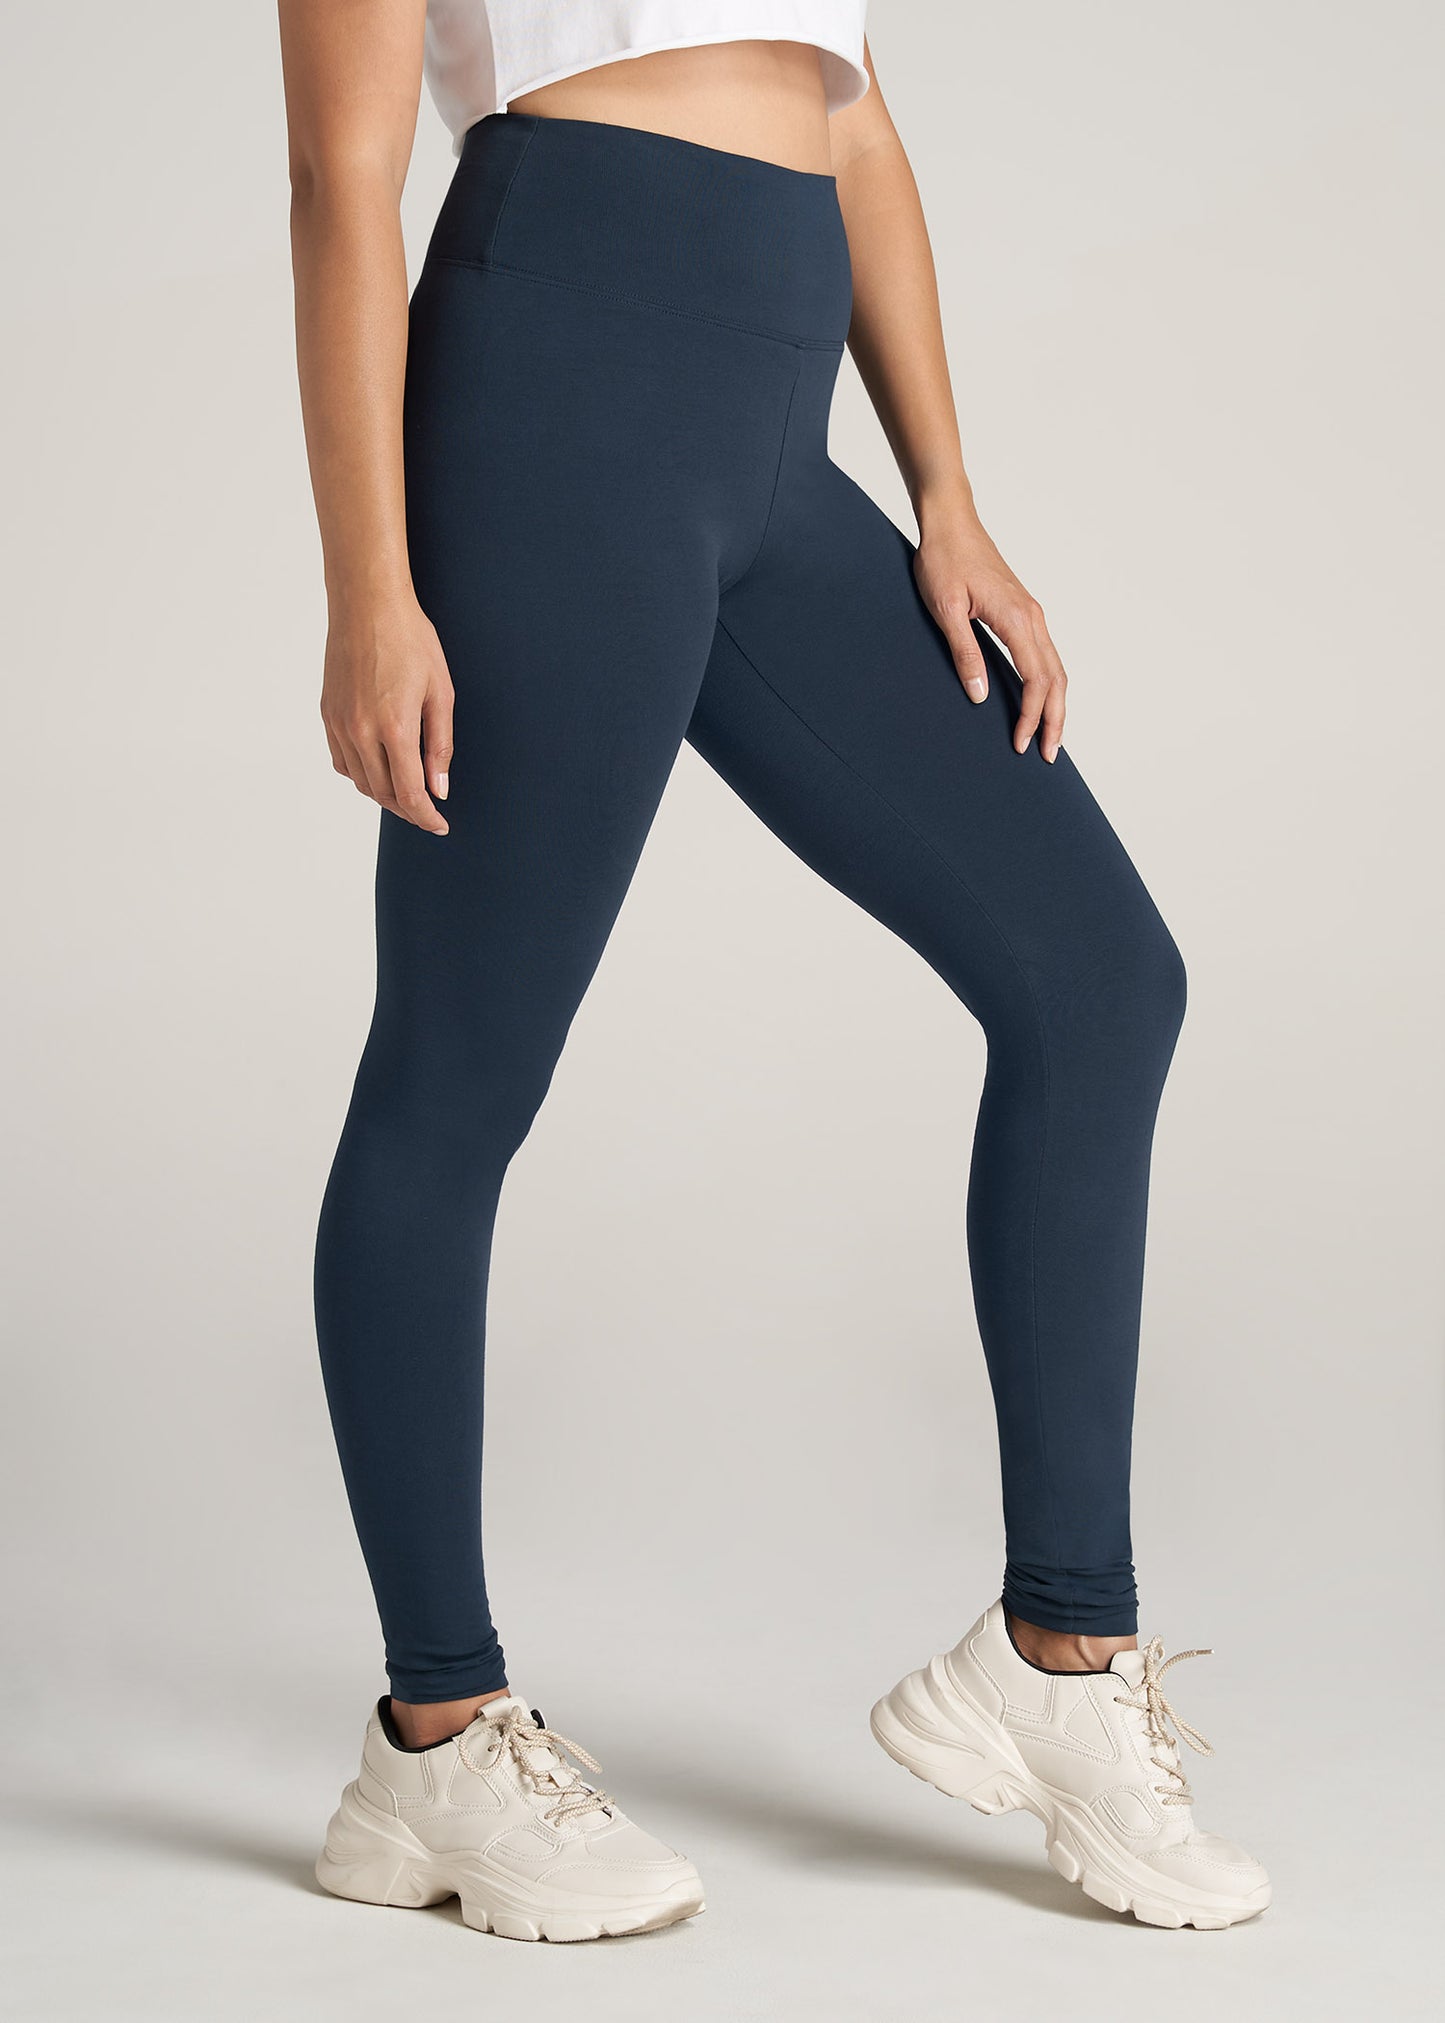 GO COLORS Womens Slim Fit Cotton Ankle Length Leggings - Tall (Navy_M)